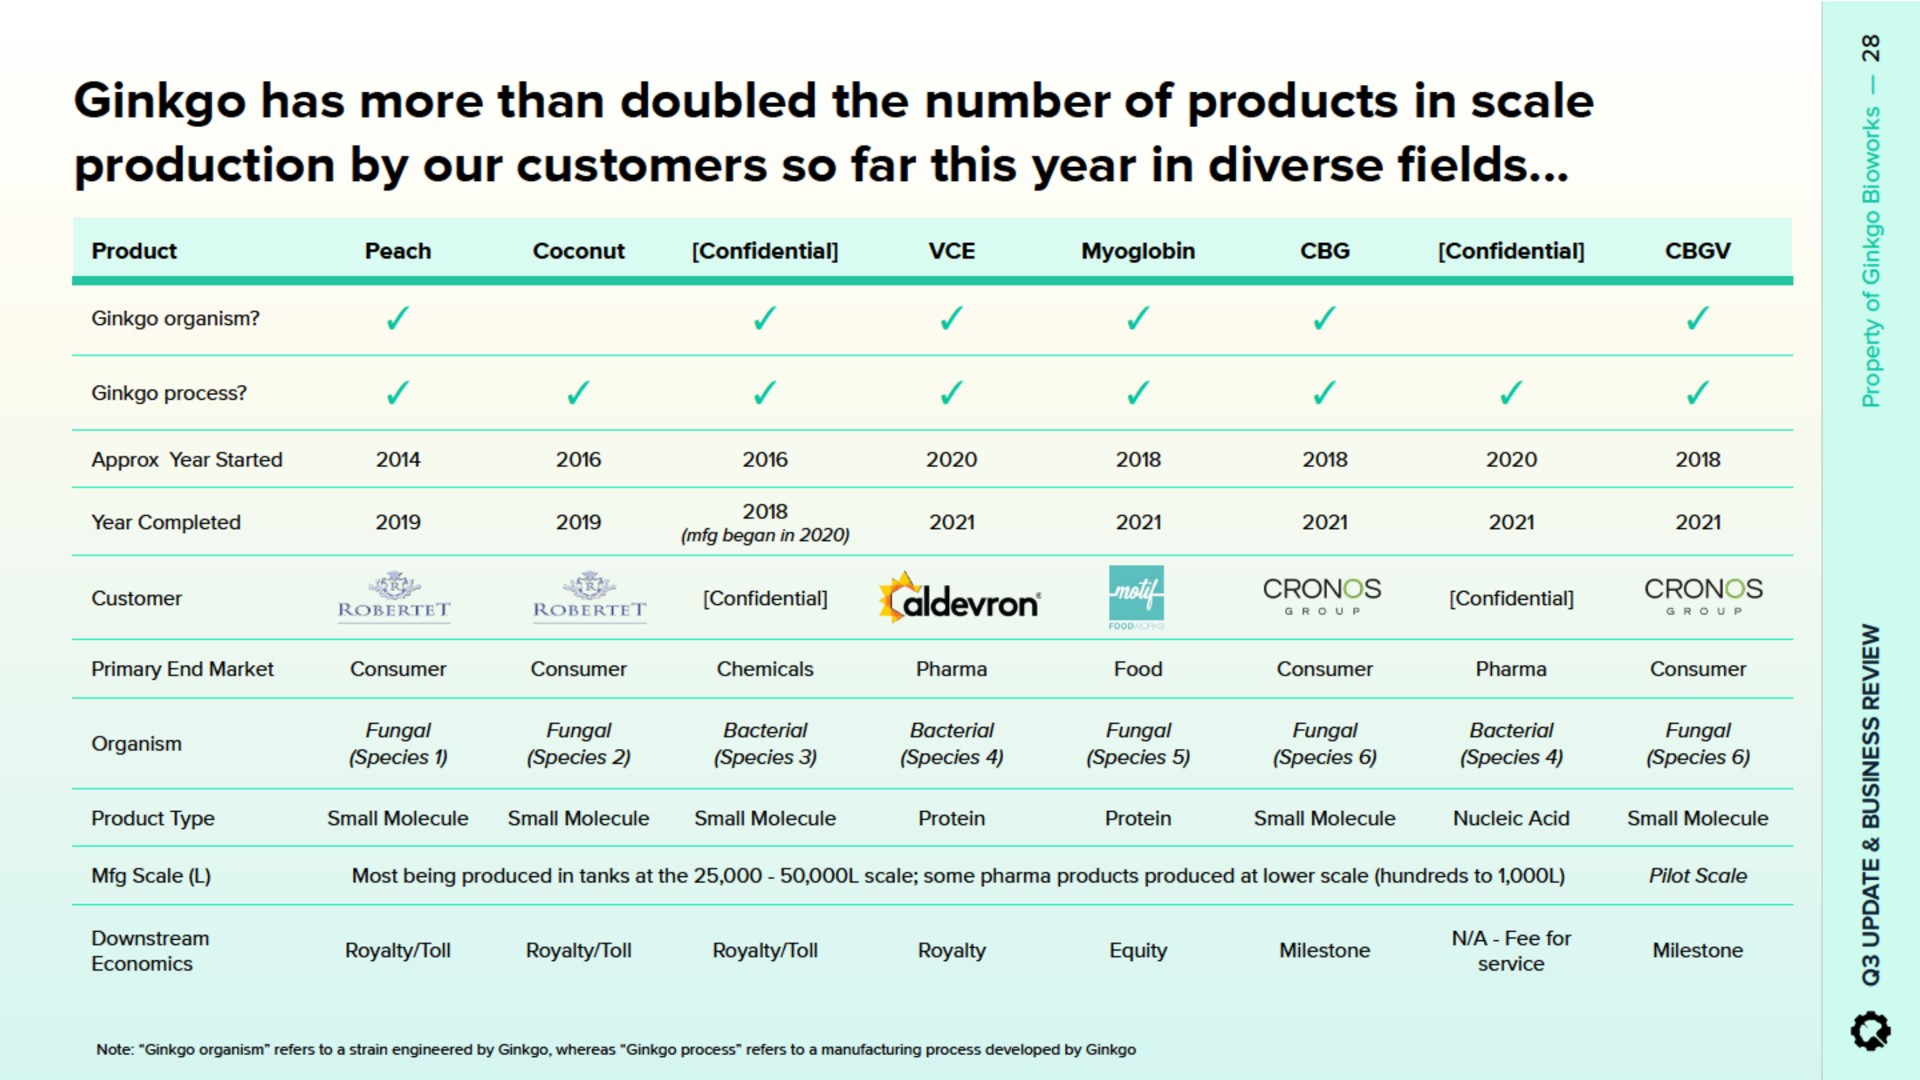 ginkgo has more than doubled the number of products in scale production by our customers so far this year in diverse fields | Ginkgo